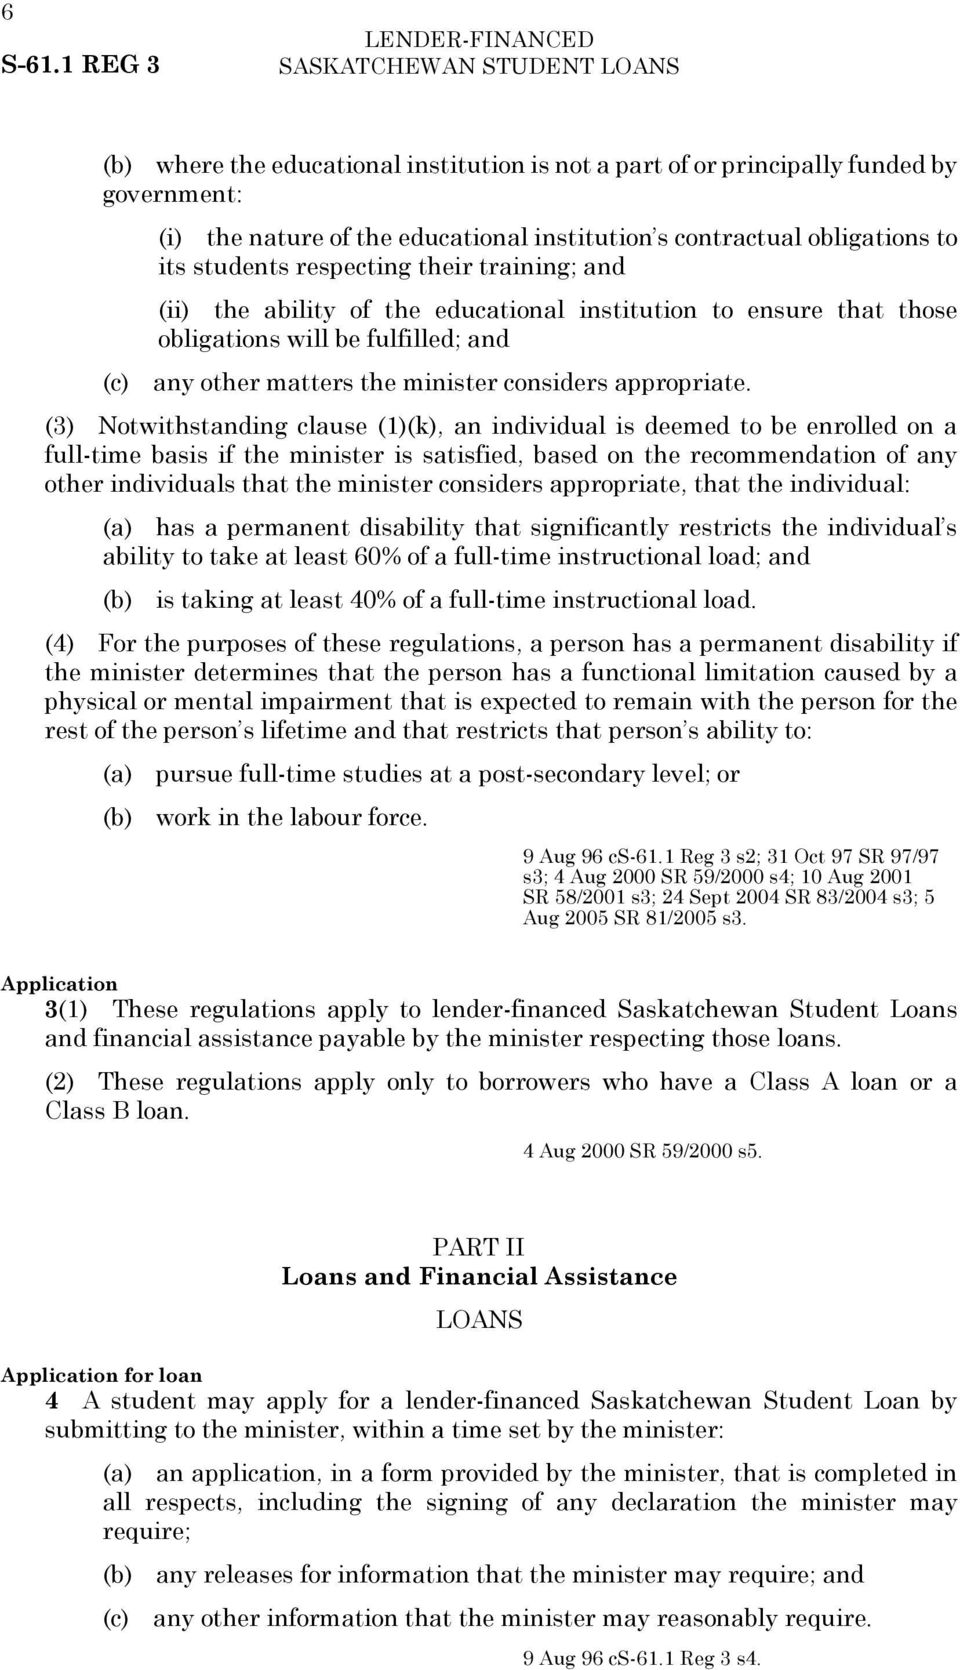 (3) Notwithstanding clause (1)(k), an individual is deemed to be enrolled on a full-time basis if the minister is satisfied, based on the recommendation of any other individuals that the minister